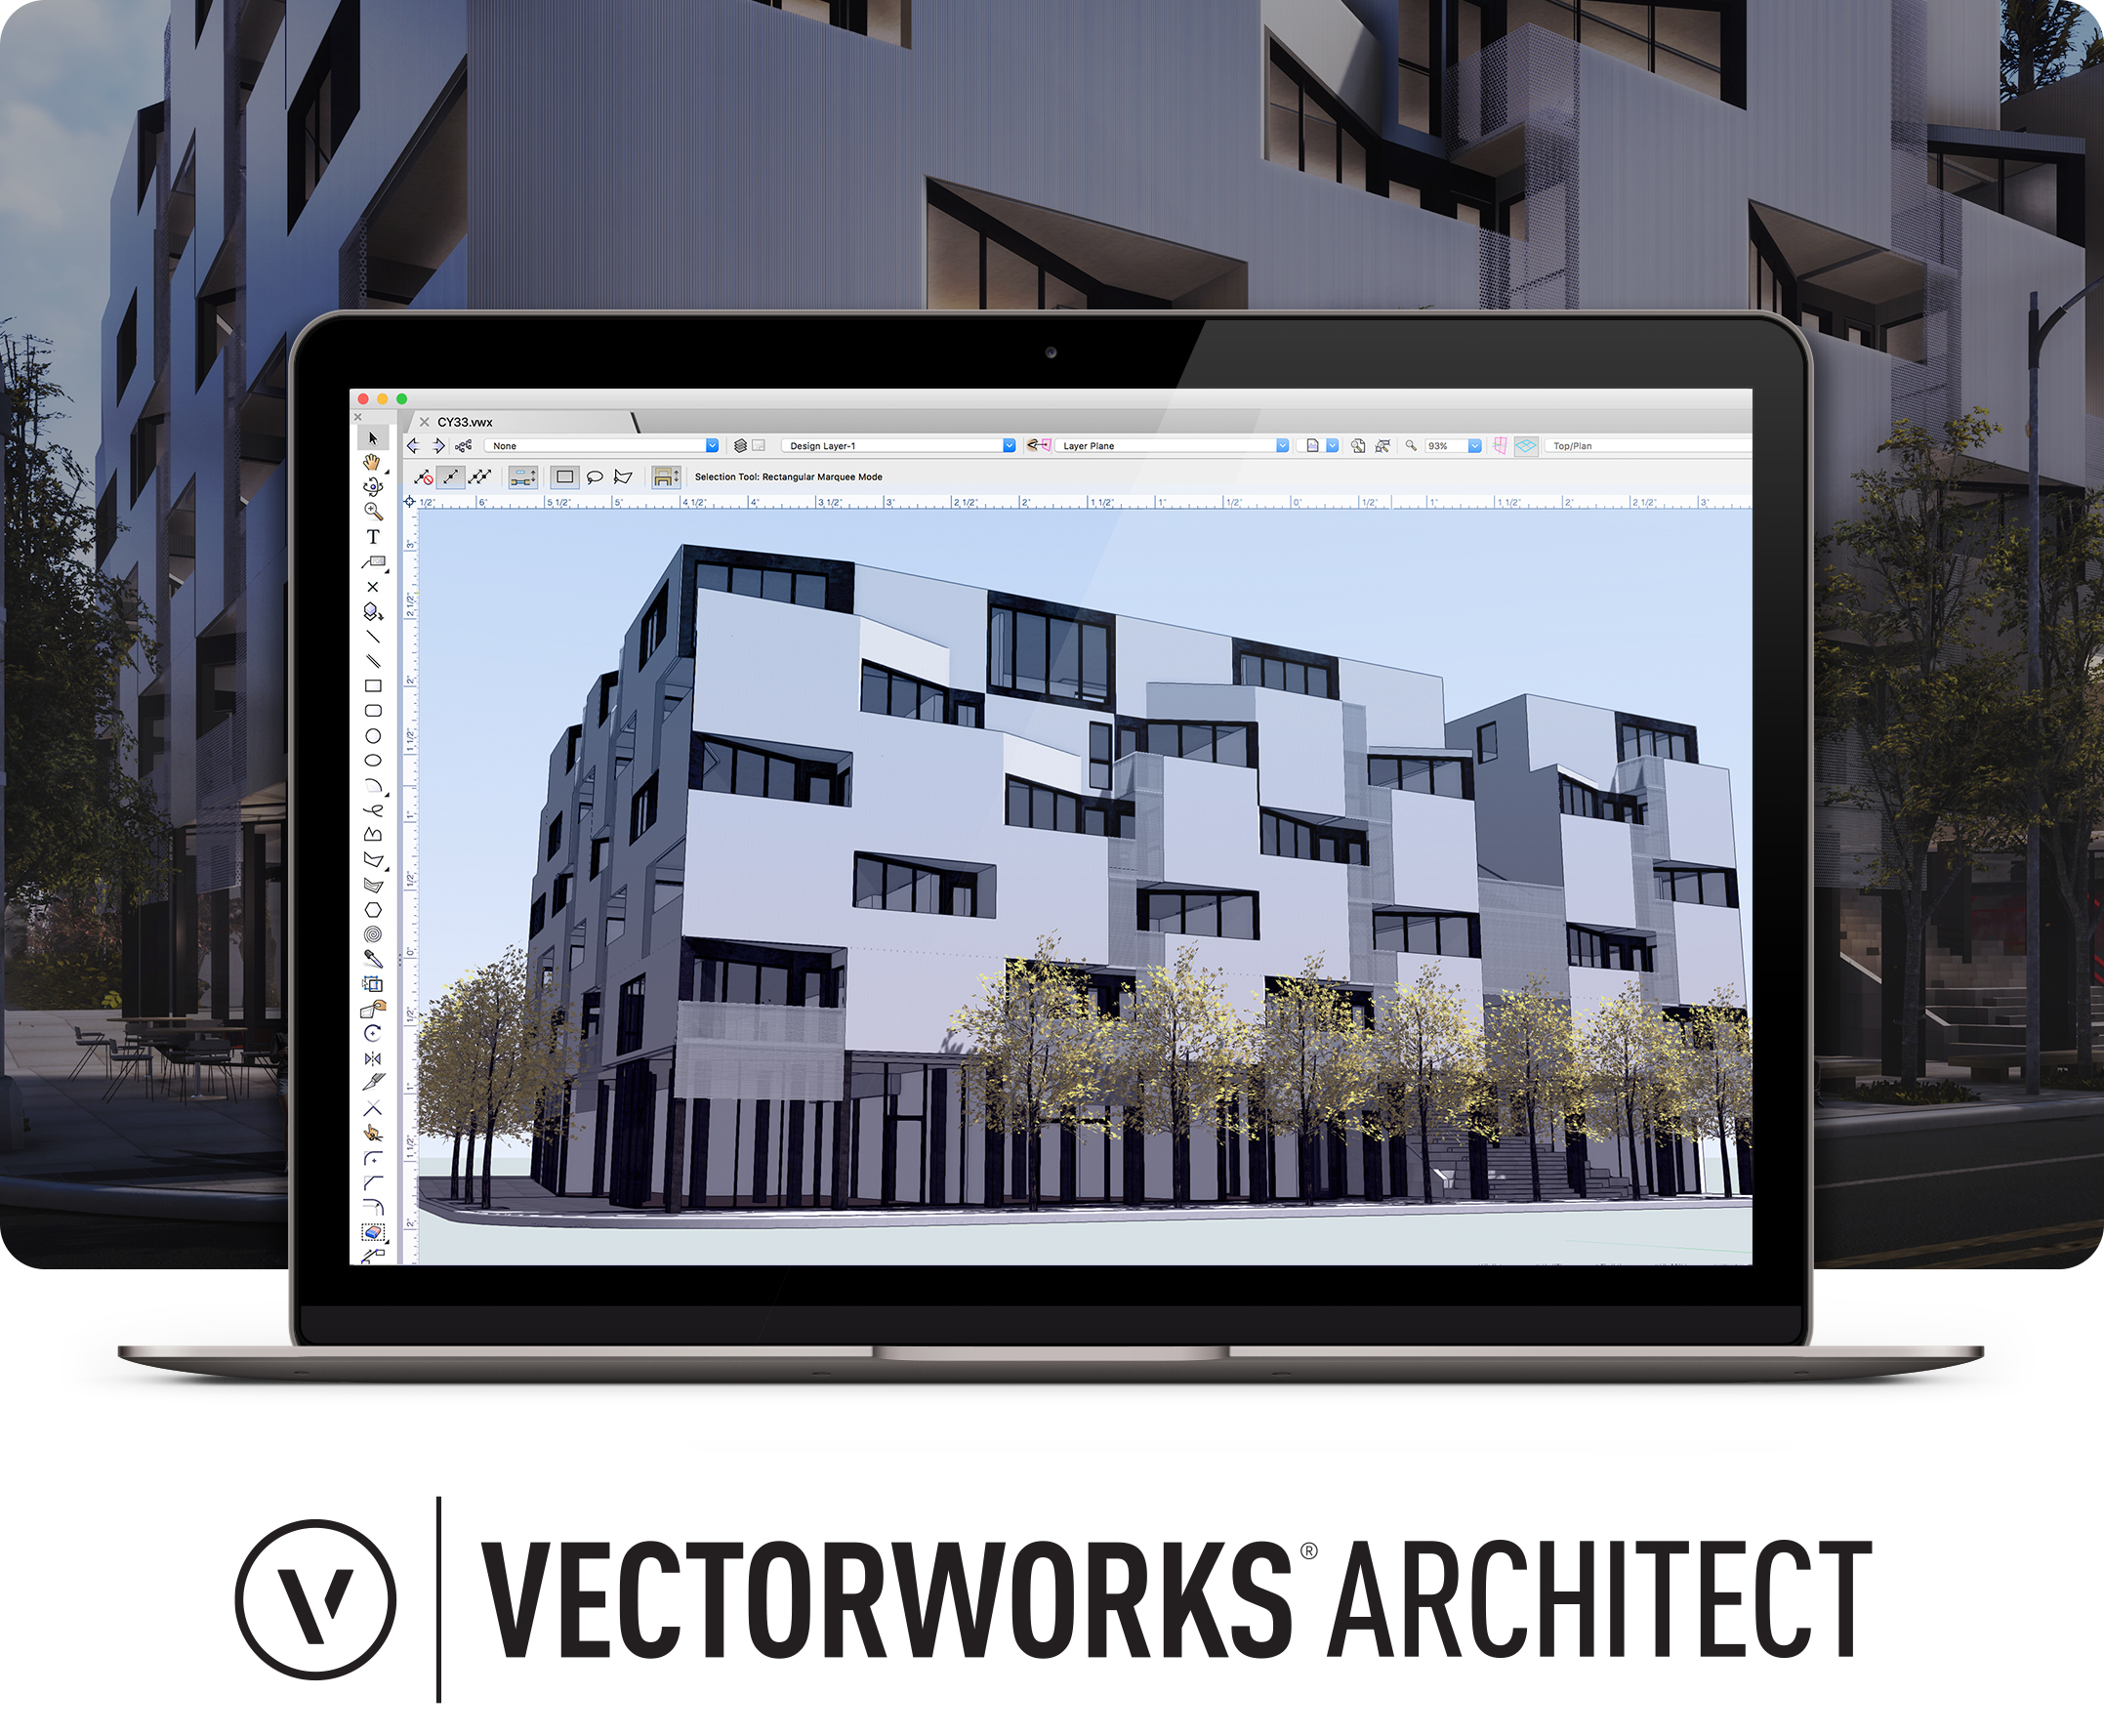 Vectorworks Architect 2020 Getting Started Tutorial